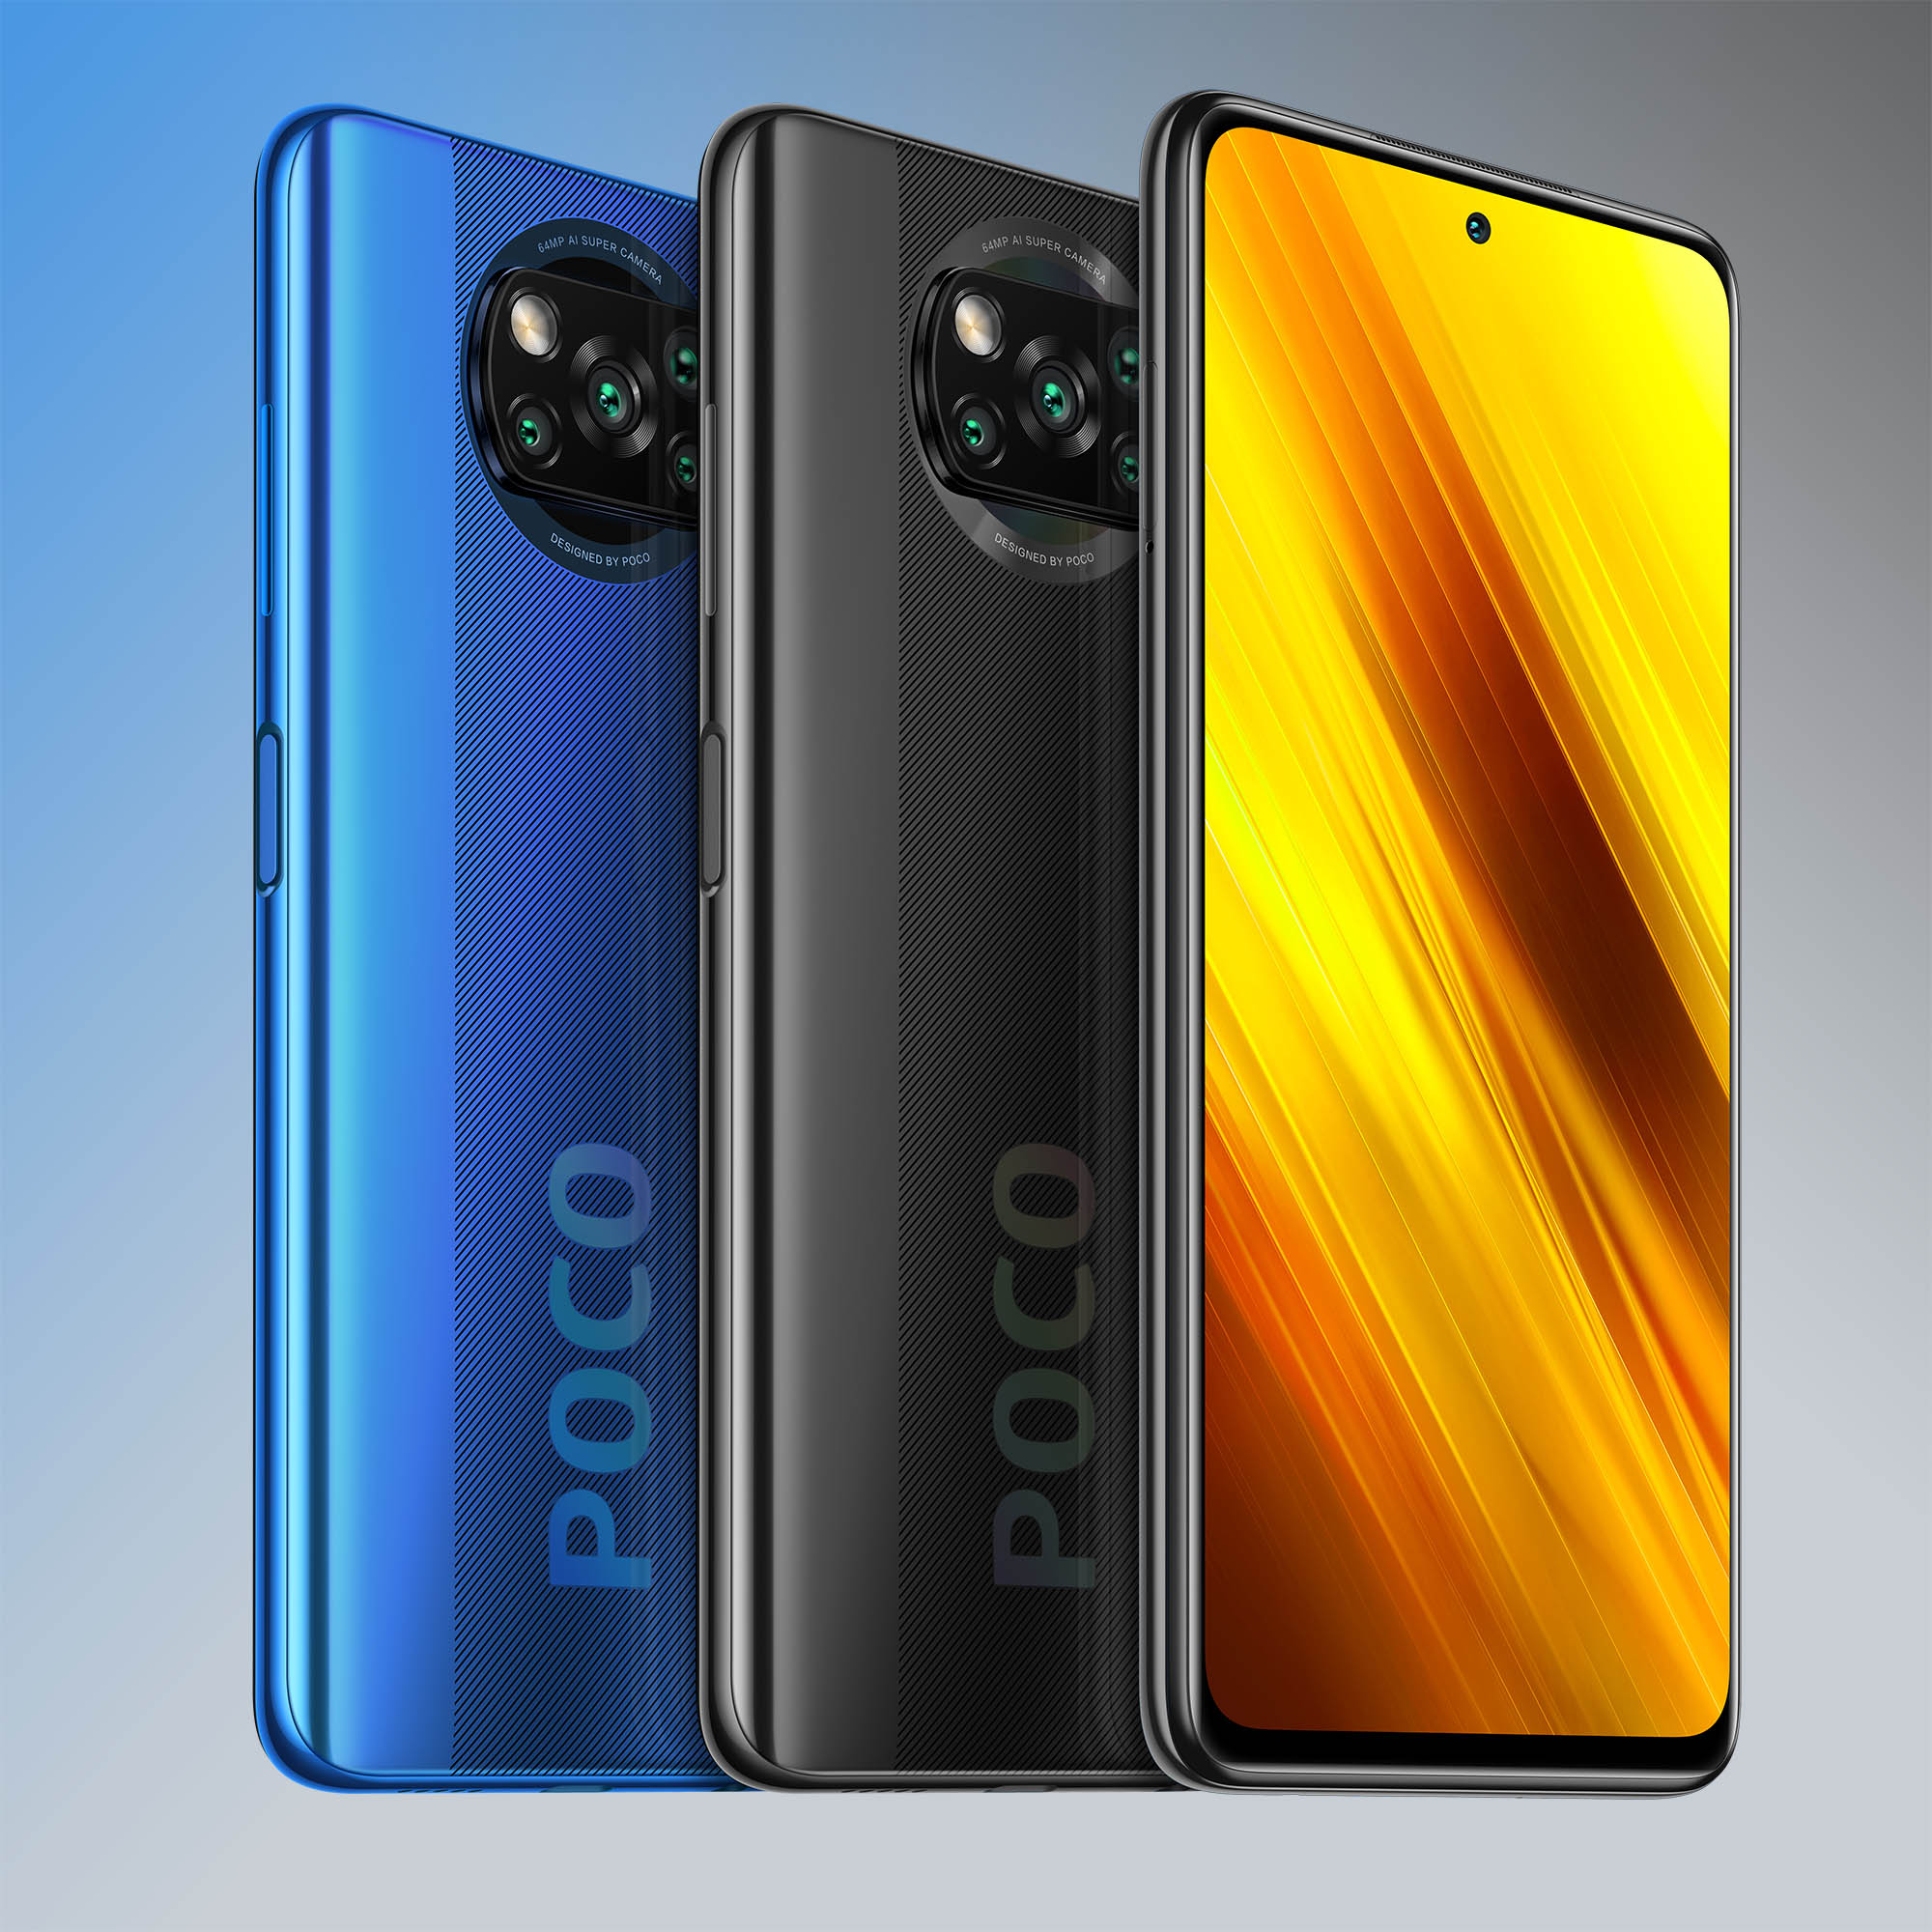 POCO X3 NFC unveiled offers top-of-the-line screen, battery and performance price starts at PHP10,990